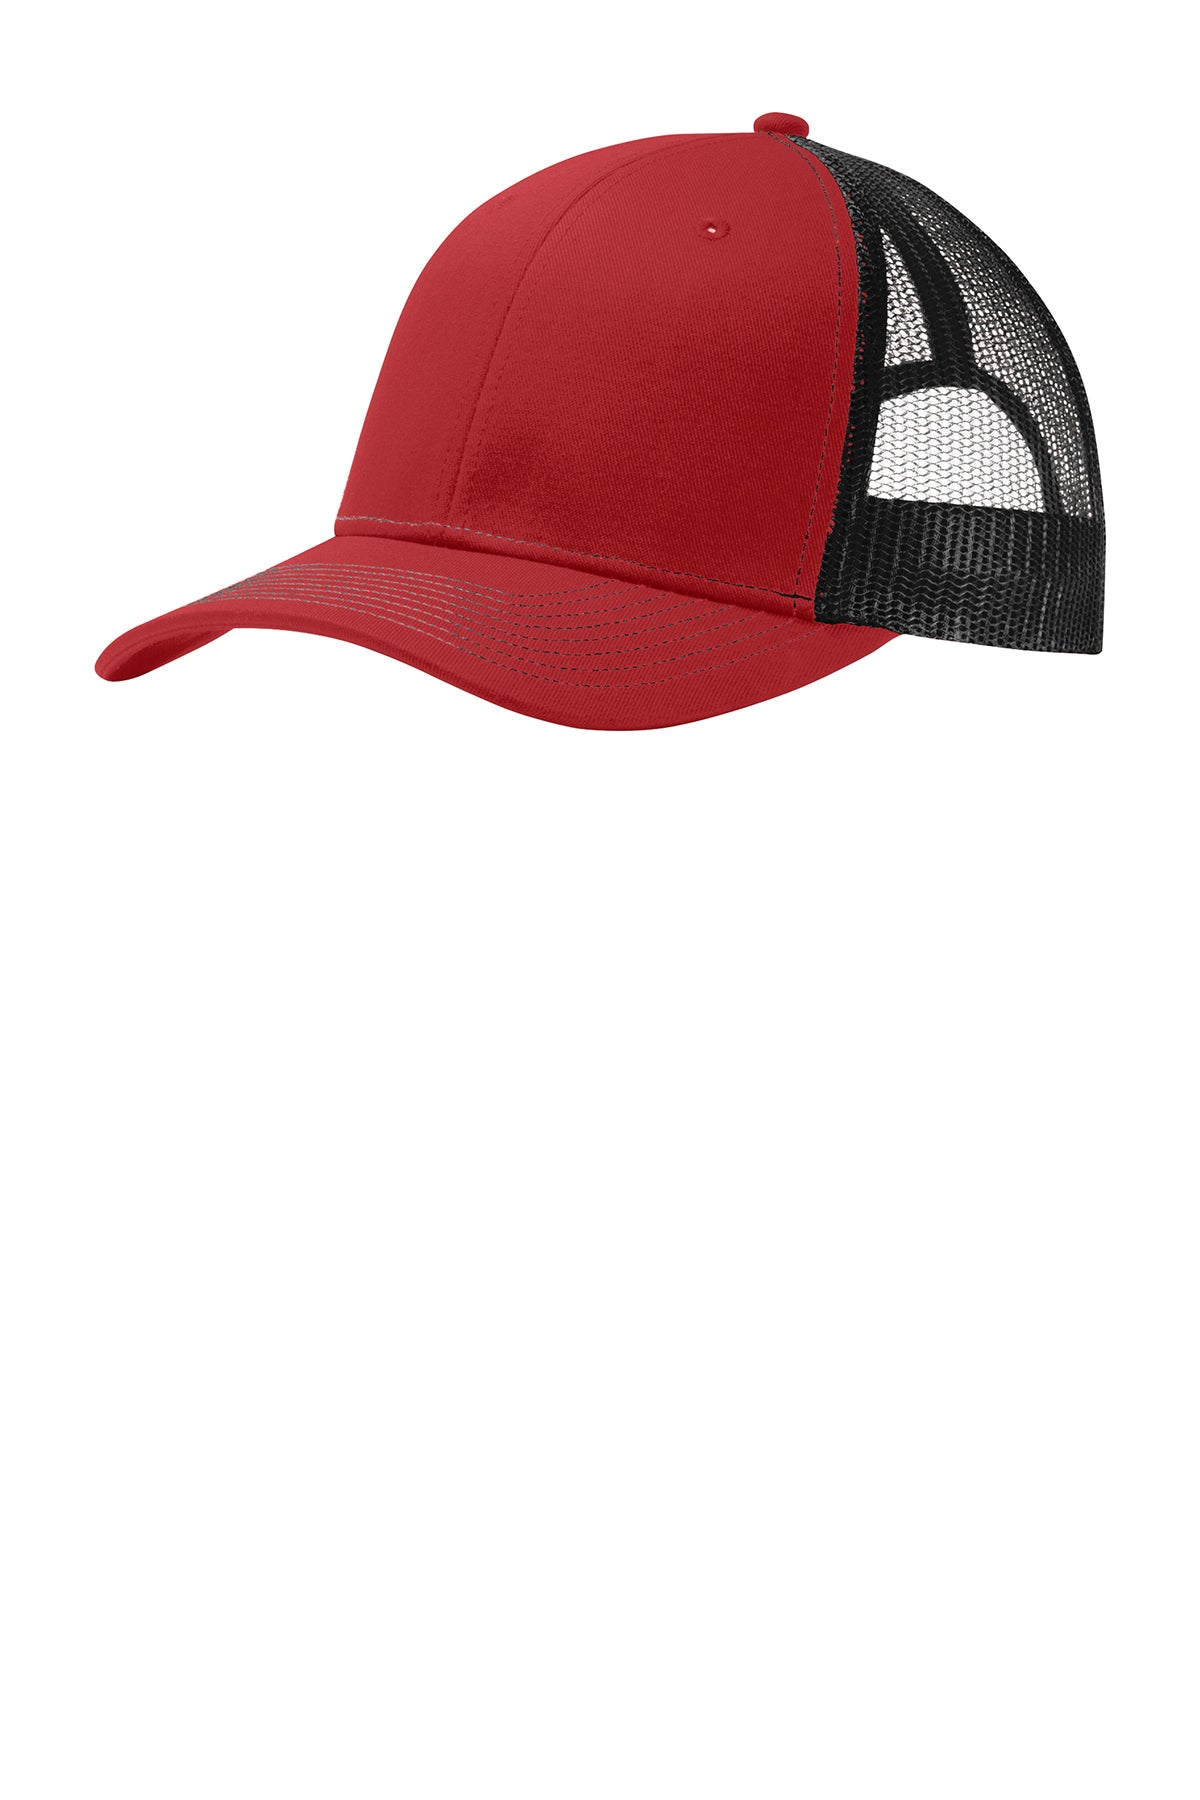 CG Chargers Red/Black Embroidered Richardson 112 cap